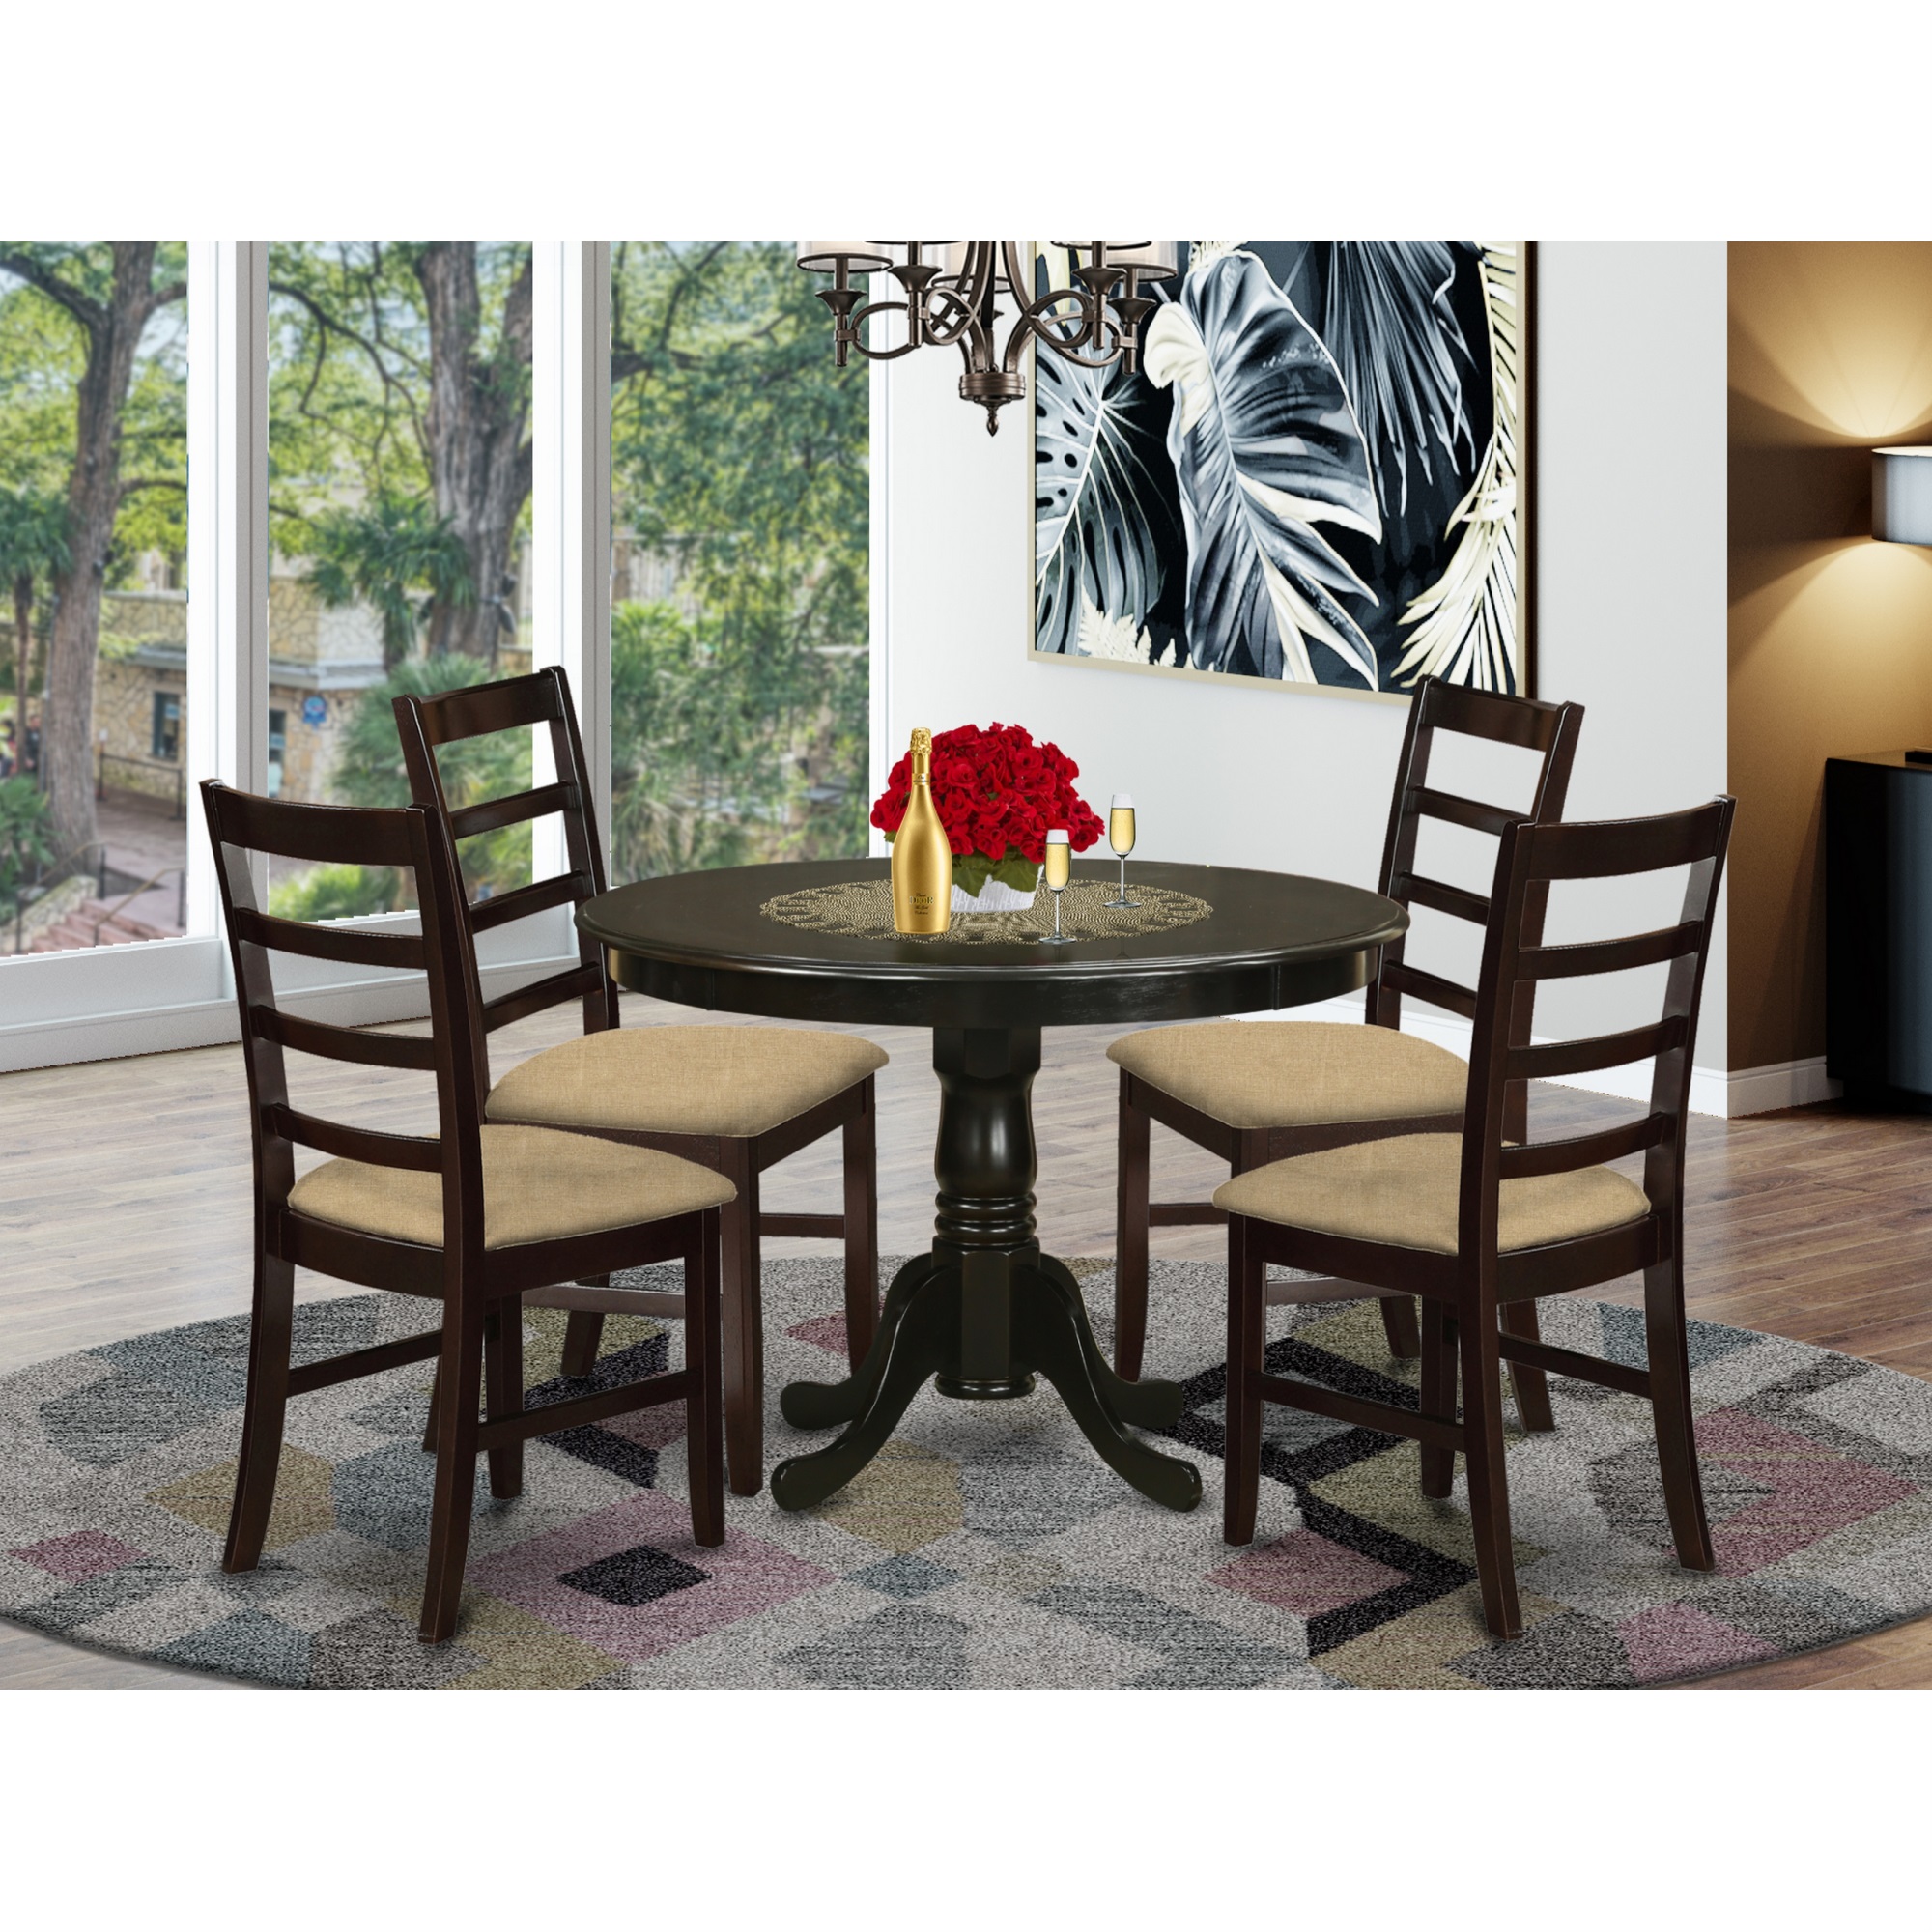 Hartland 5 Piece Round Pedestal Dining Table Set with Antique Chairs - image 3 of 3